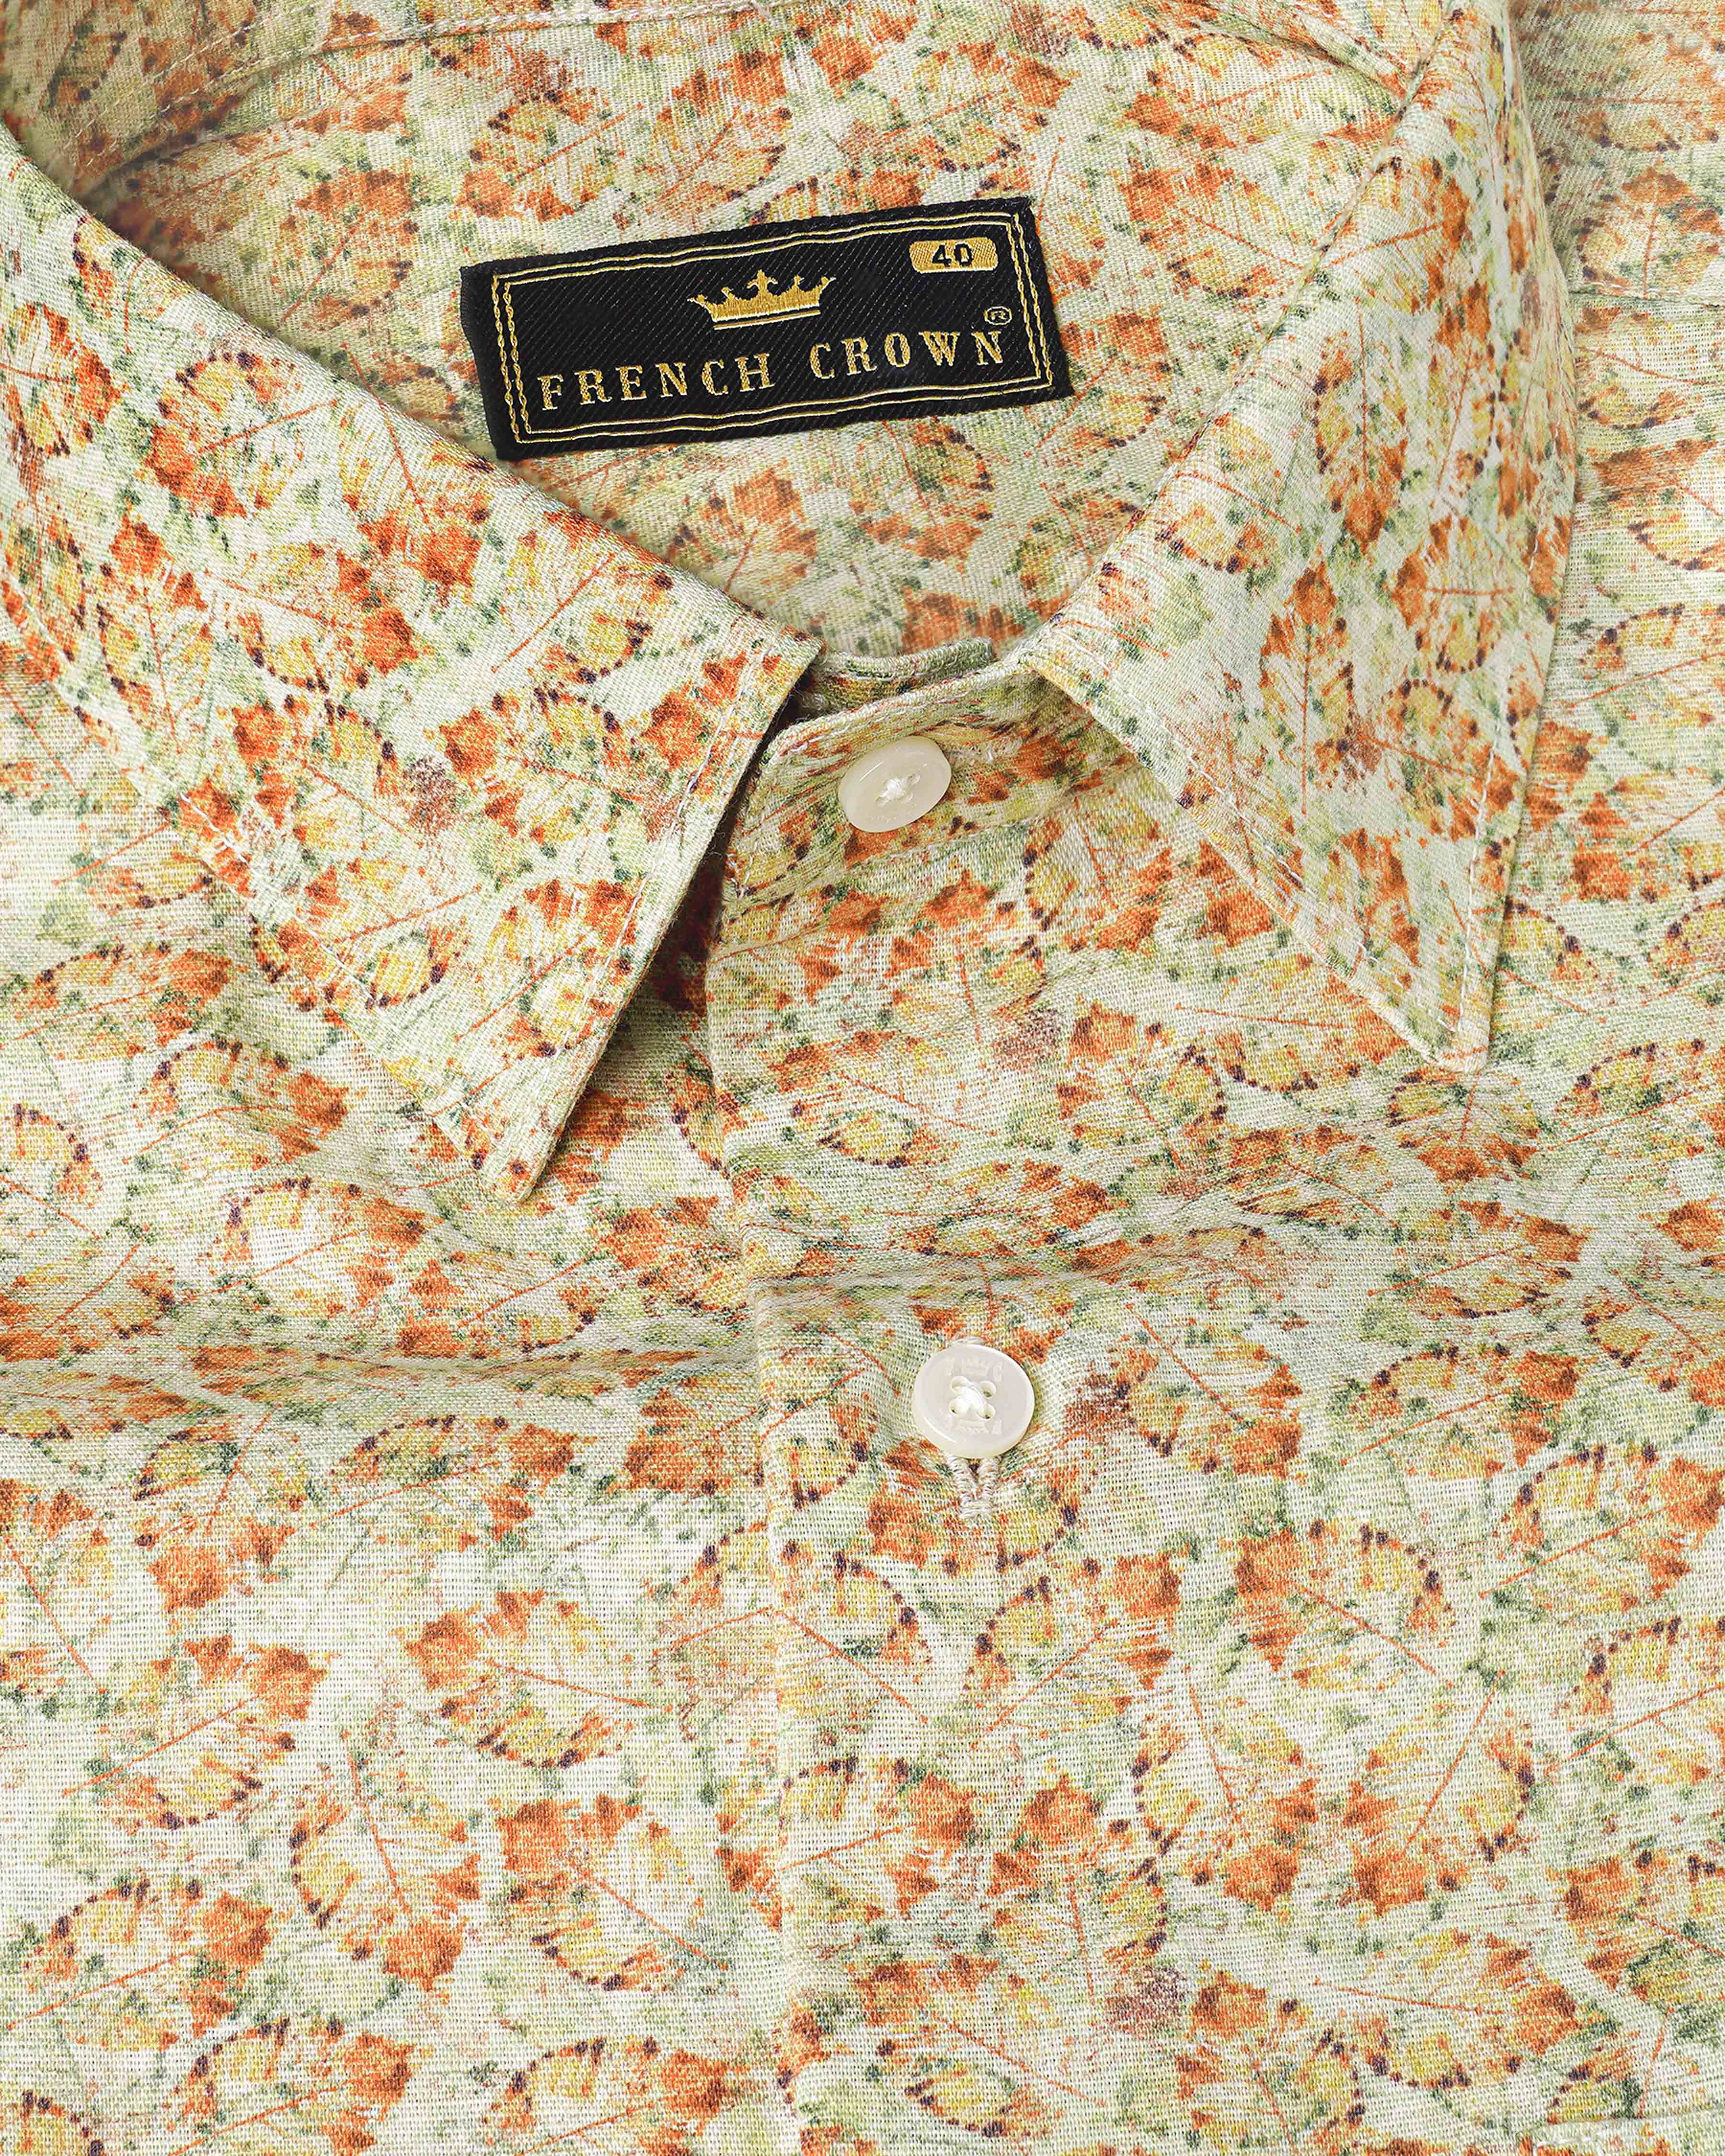  Periglacial Cream with Tuscany Brown and Coriander Green Printed Luxurious Linen Shirt 8031-38, 8031-H-38, 8031-39,8031-H-39, 8031-40, 8031-H-40, 8031-42, 8031-H-42, 8031-44, 8031-H-44, 8031-46, 8031-H-46, 8031-48, 8031-H-48, 8031-50, 8031-H-50, 8031-52, 8031-H-52